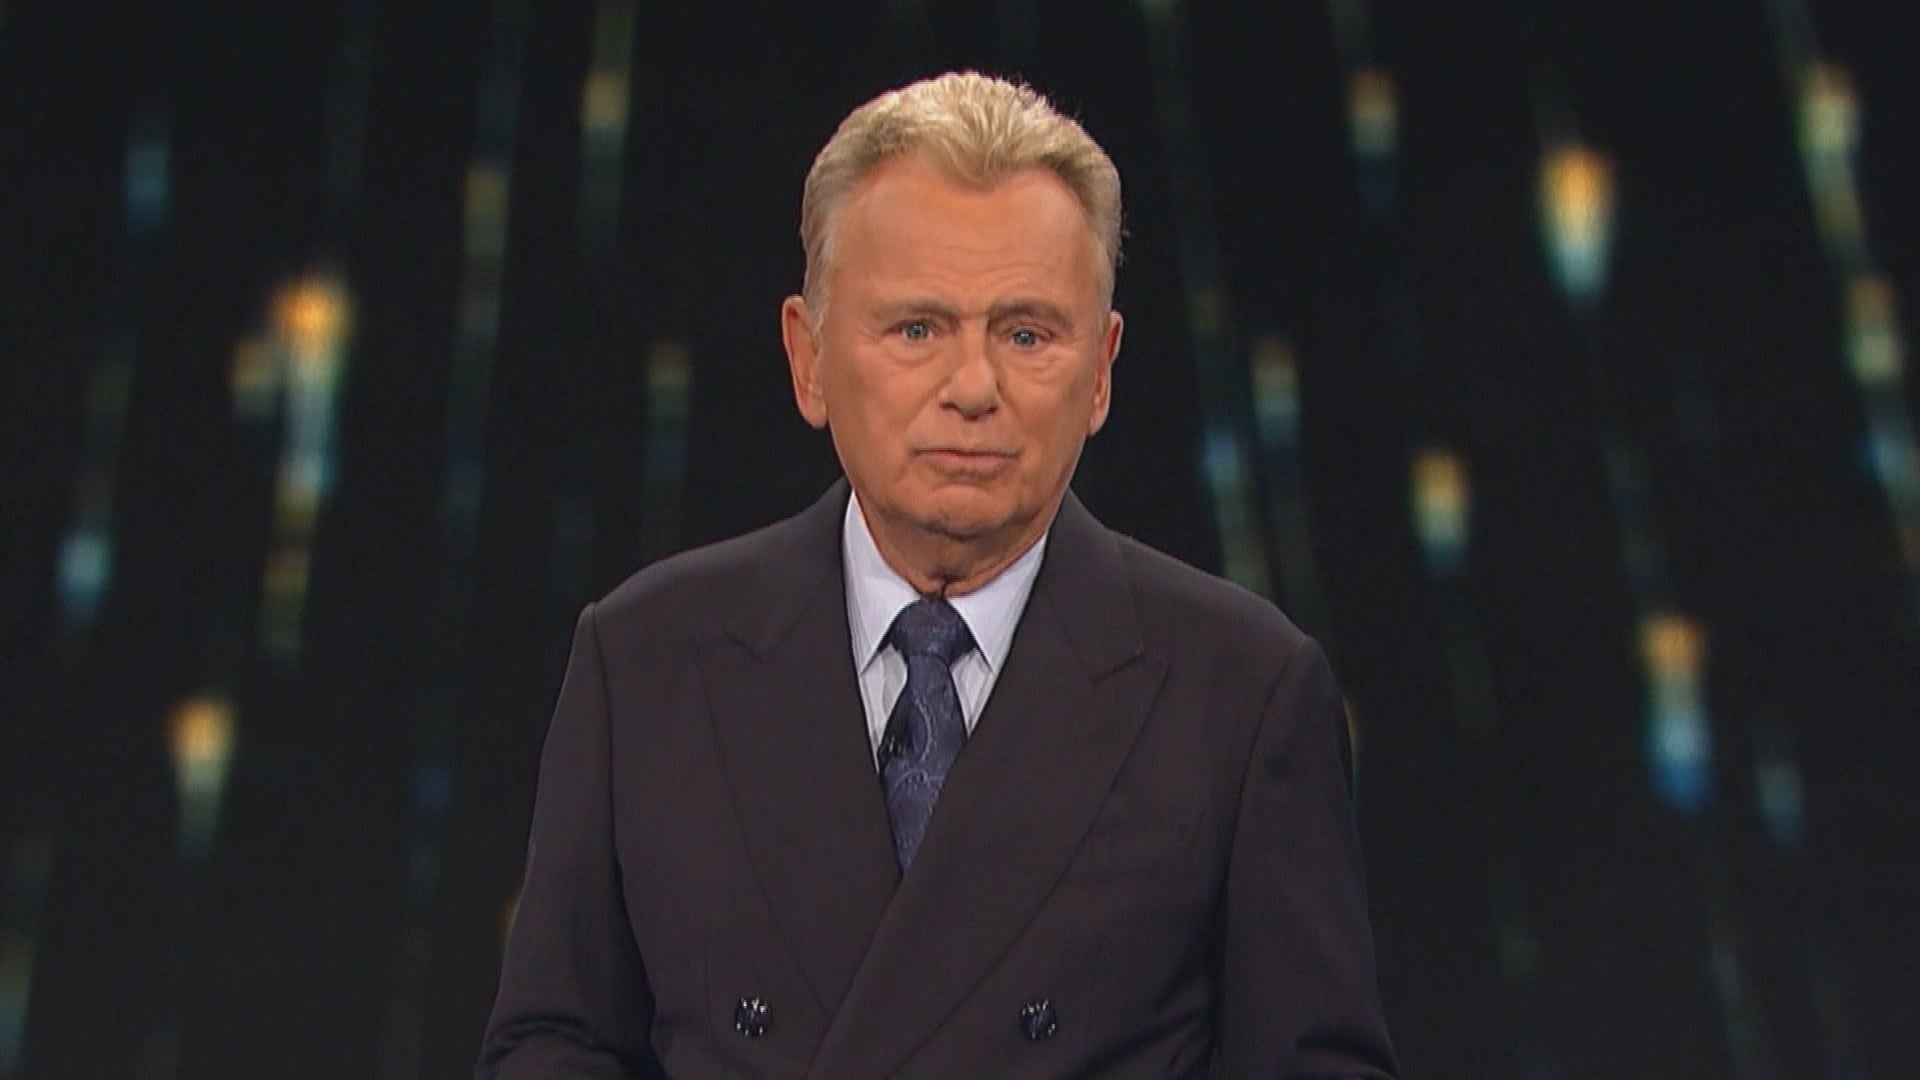 Pat Sajak Leaves 'Wheel of Fortune' After 40 Years